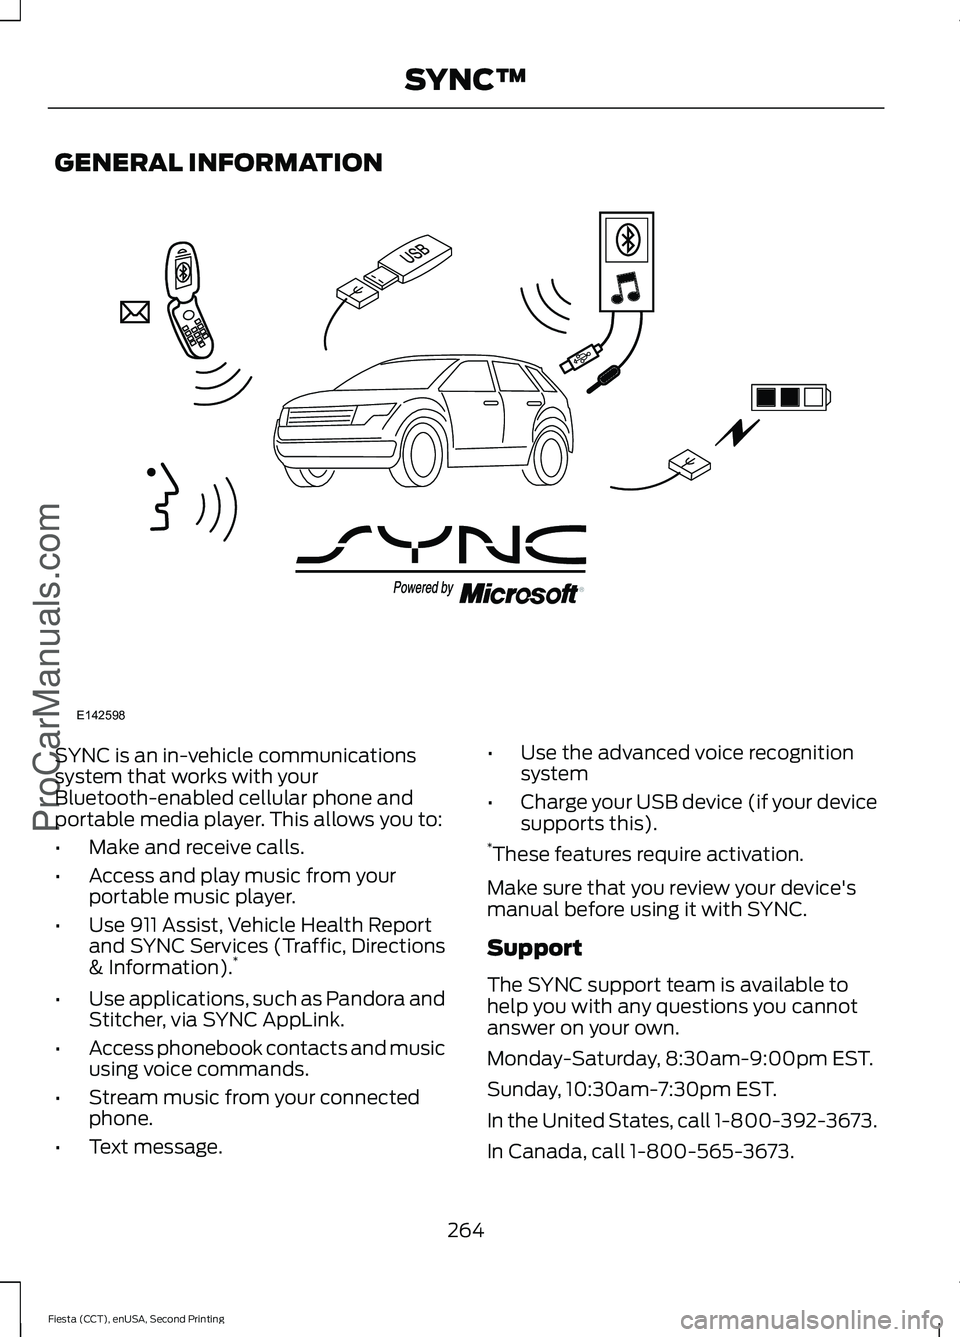 FORD FIESTA 2015  Owners Manual GENERAL INFORMATION
SYNC is an in-vehicle communications
system that works with your
Bluetooth-enabled cellular phone and
portable media player. This allows you to:
•
Make and receive calls.
• Acc